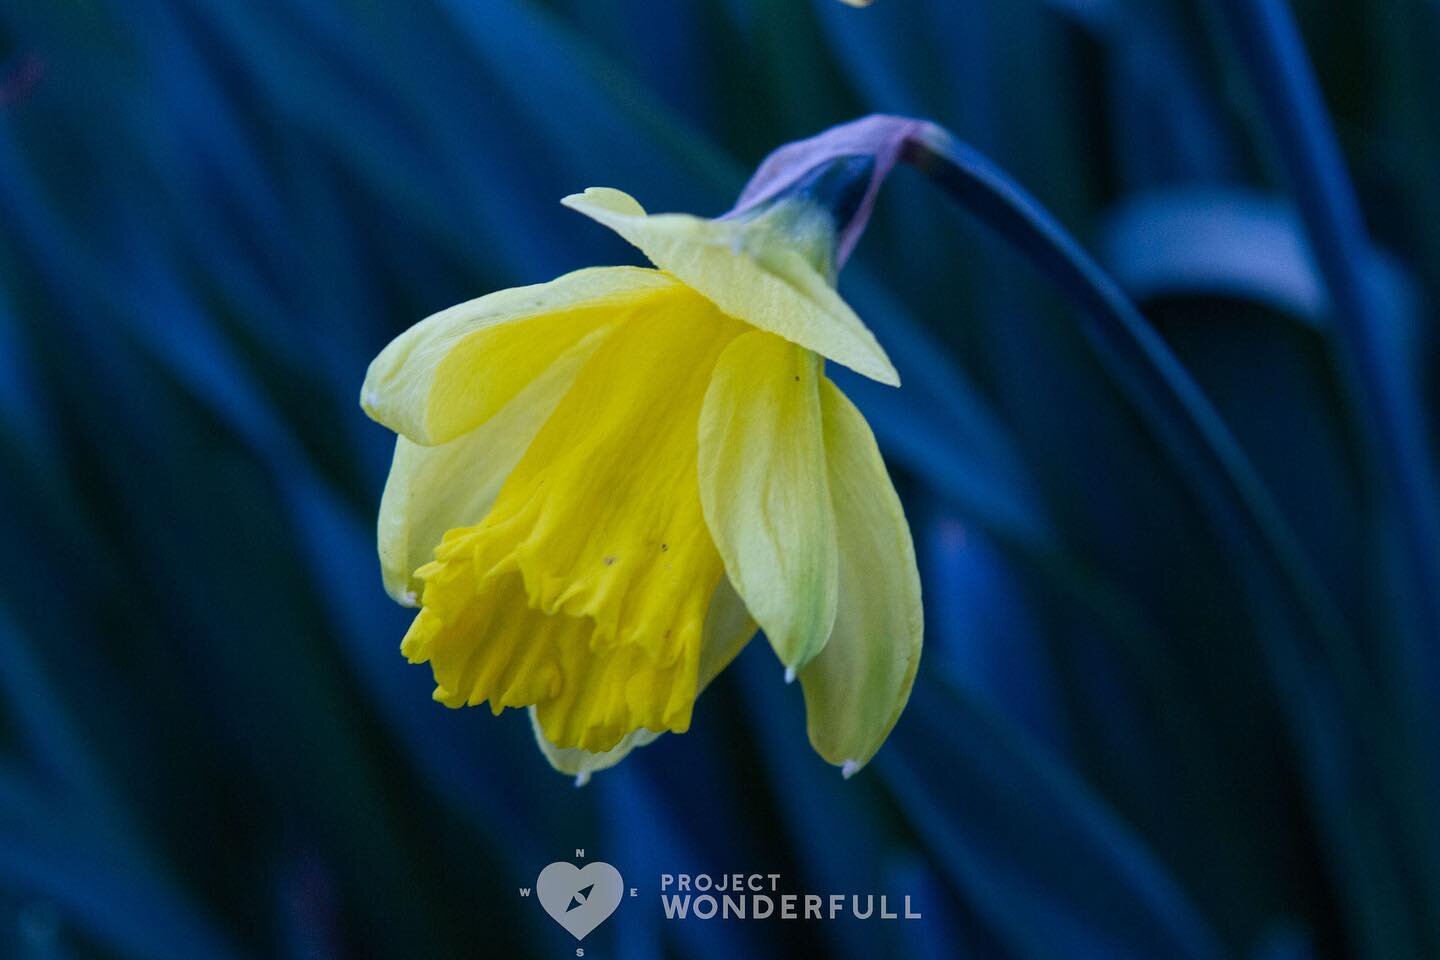 Signs of Spring make me smile&hellip; So sharing this one in hopes that it makes you smile, too. 

#beautybringssmiles 

Today&rsquo;s WonderFULL: Expressive Daffodil.

(Ridgewood,NJ) 

Today&rsquo;s MindFULL: Take a 10 minute walk today in nature an